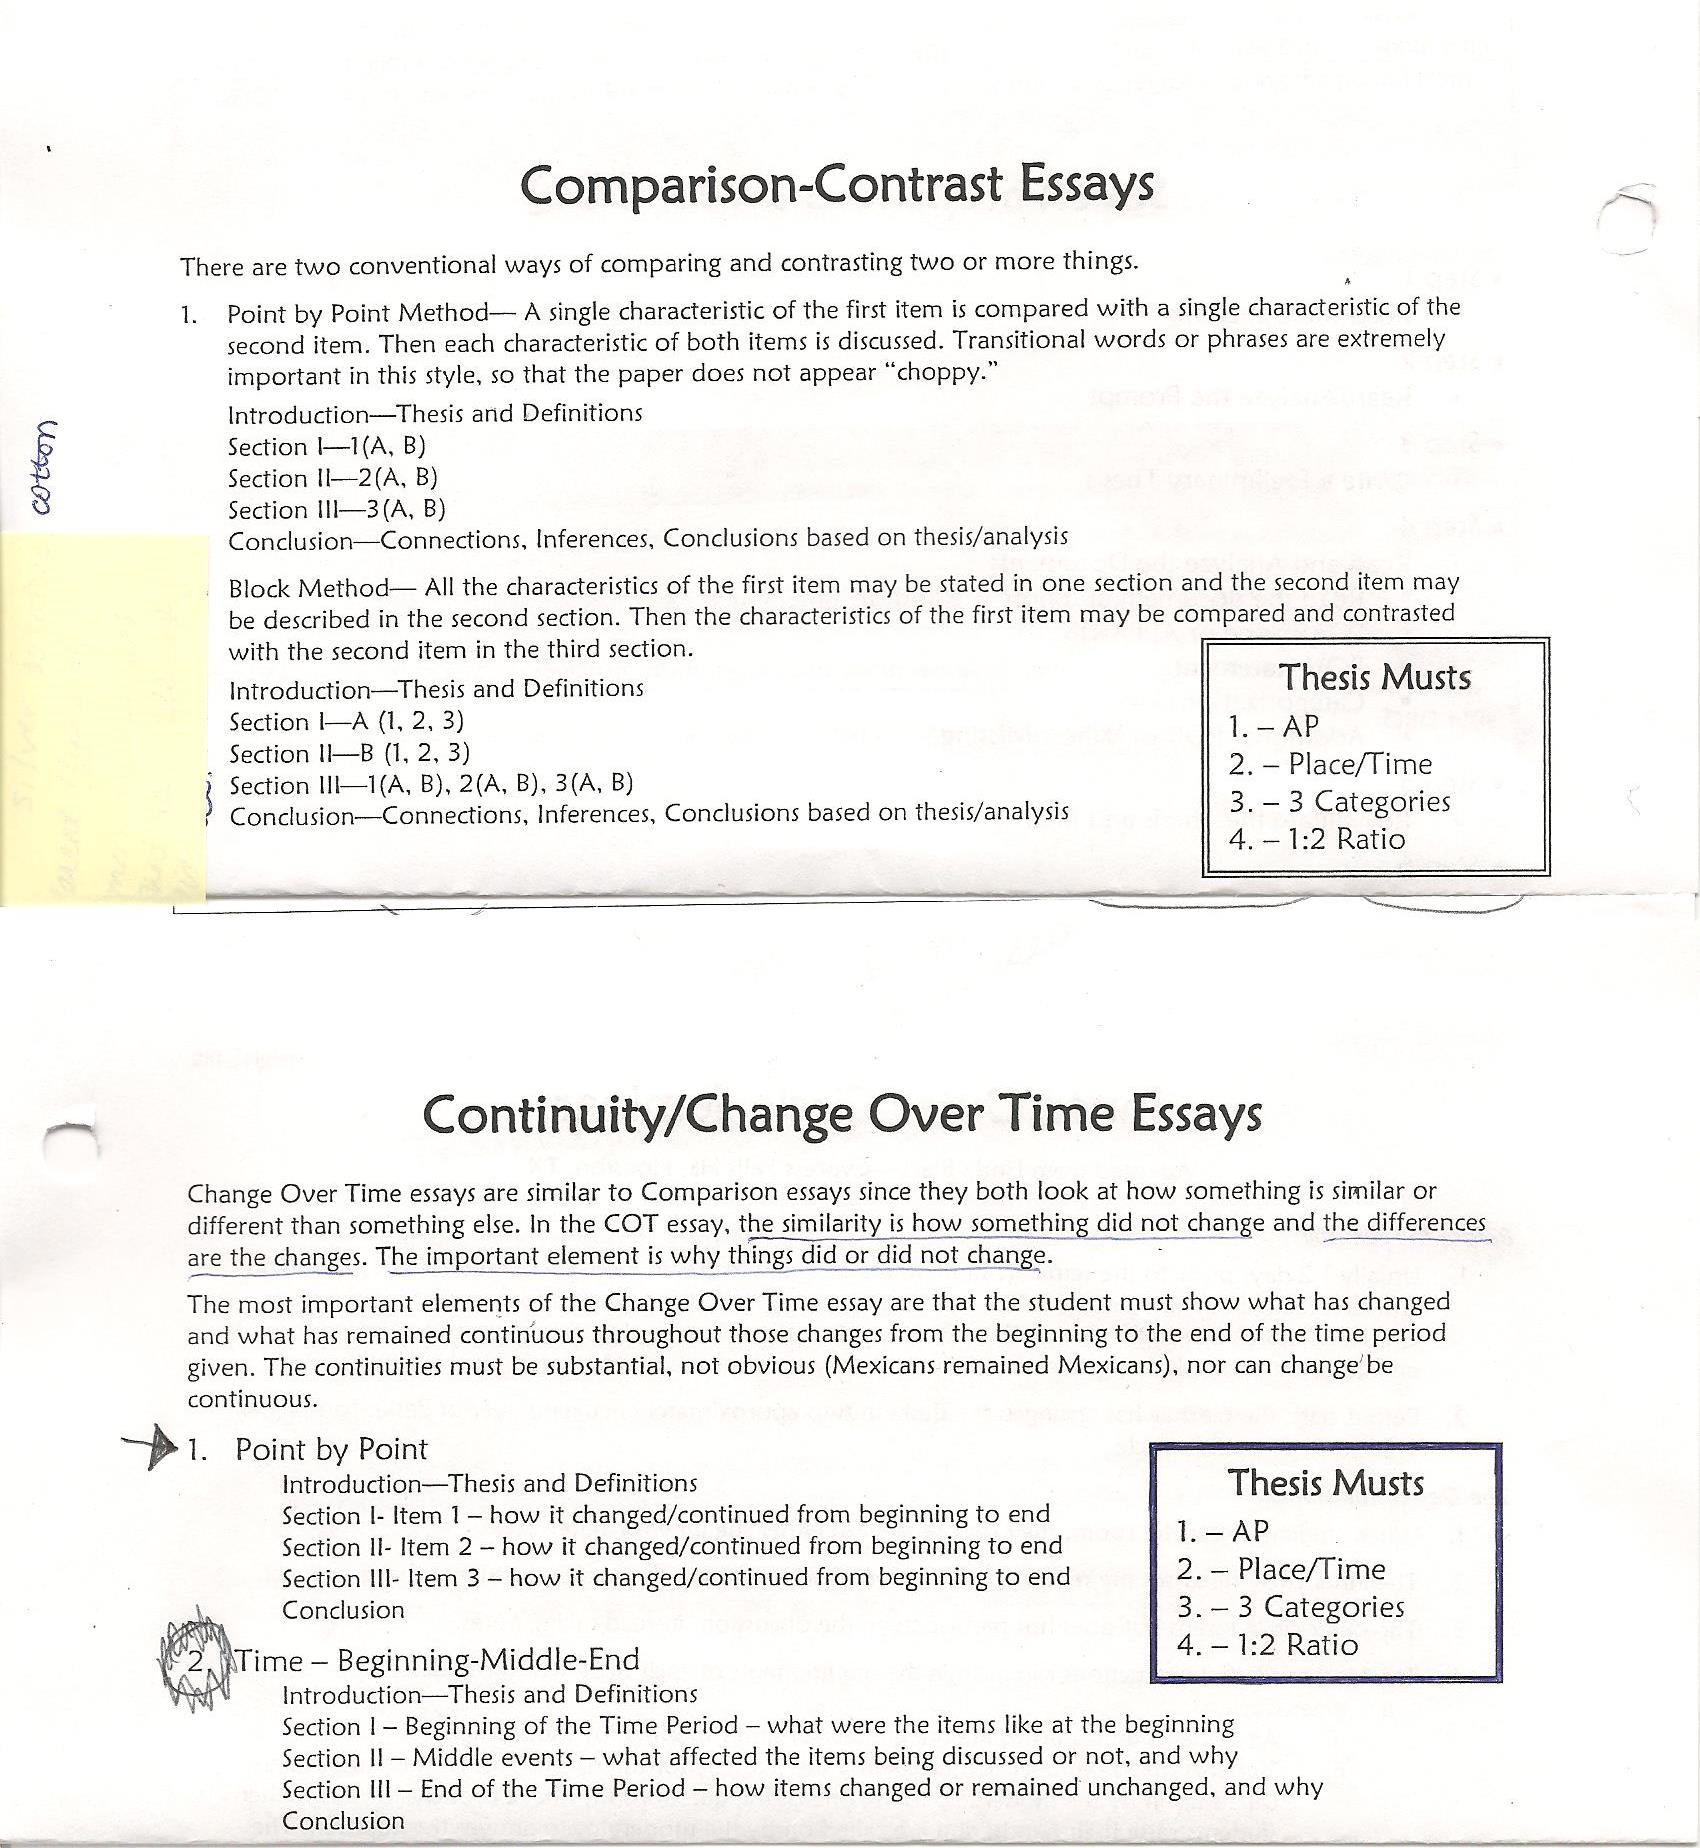 Compare and contrast essay prompts for middle school